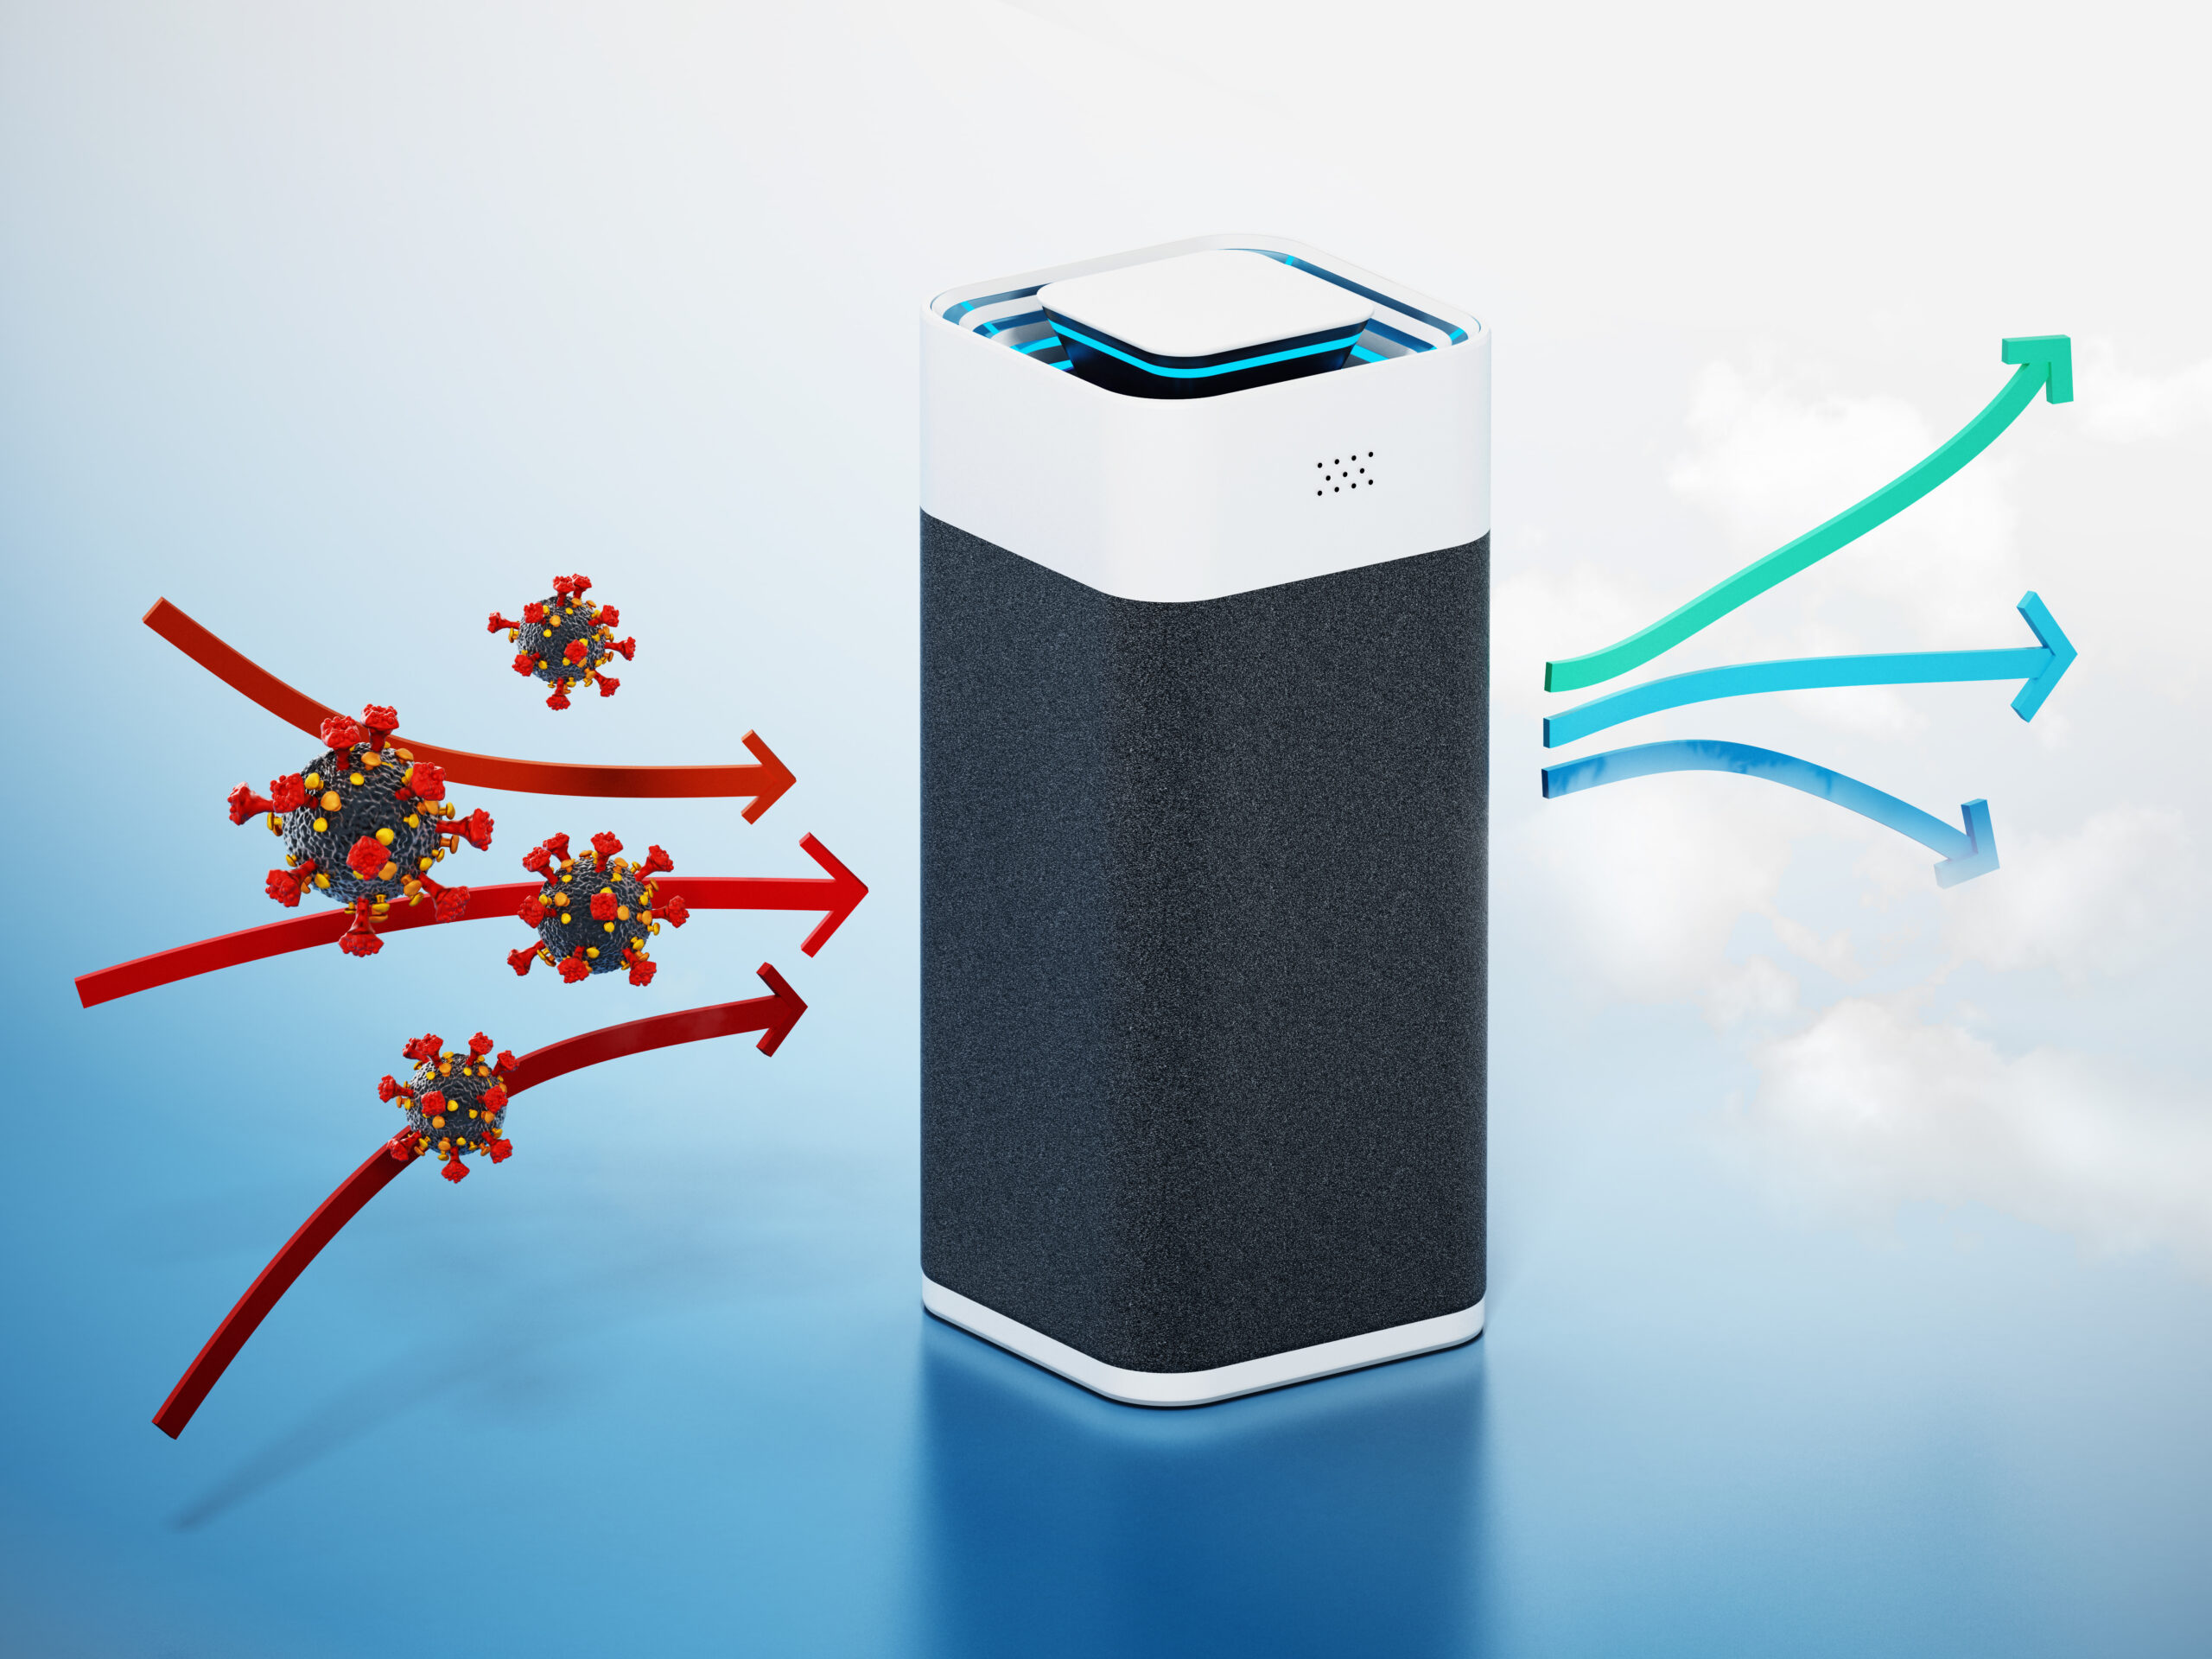 Are Air Purifiers Worth the Investment?